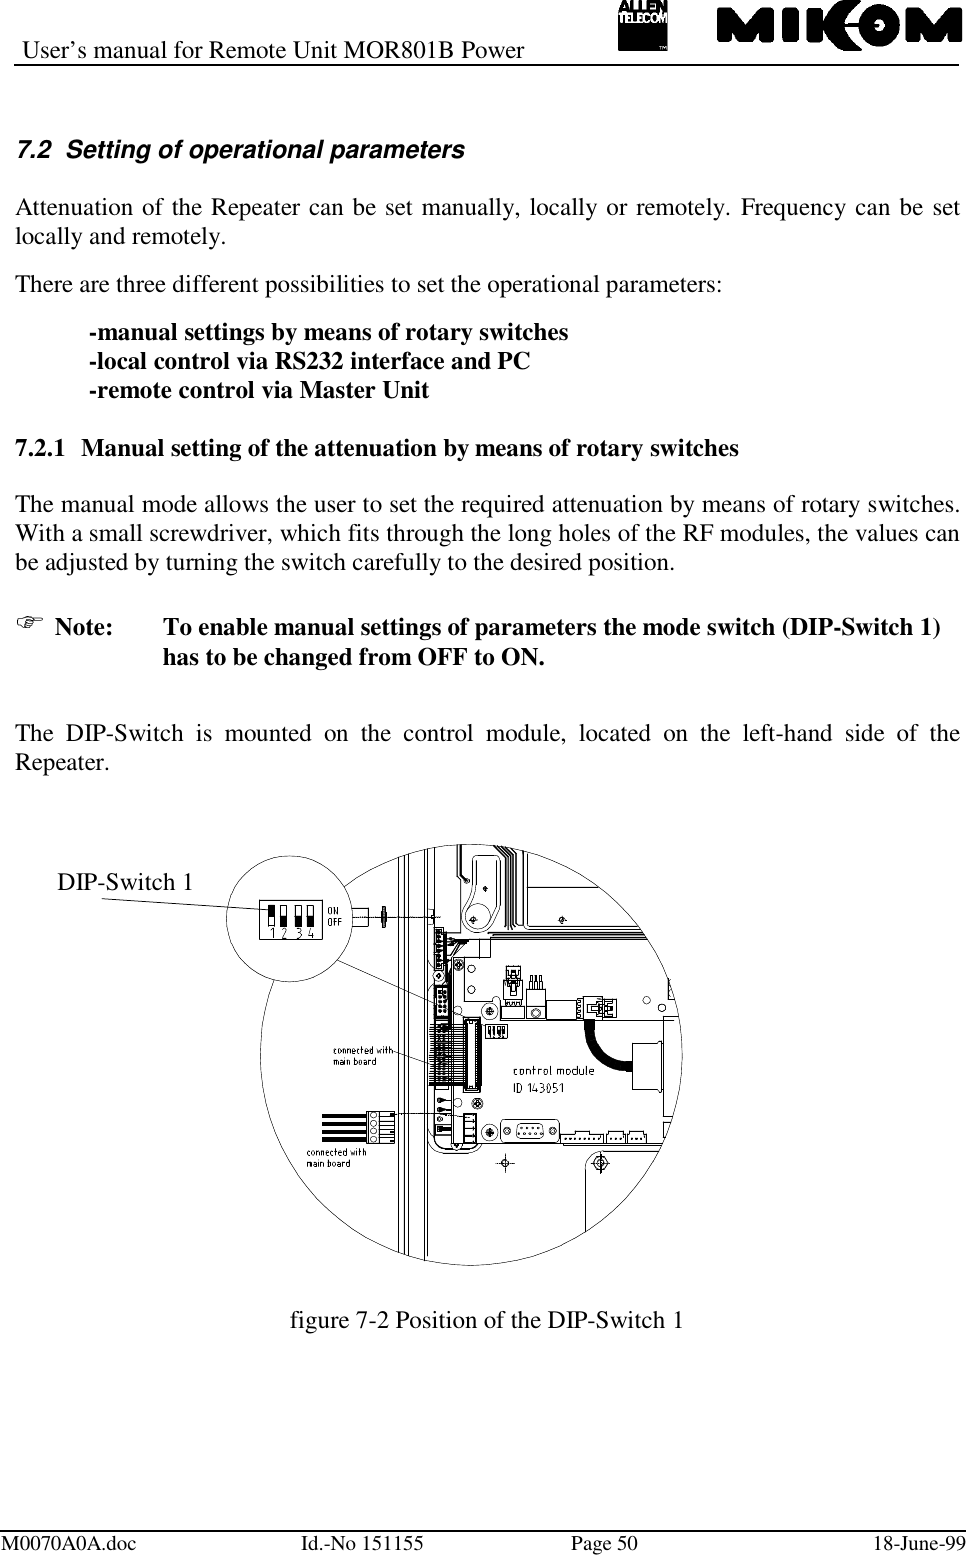 User’s manual for Remote Unit MOR801B PowerM0070A0A.doc Id.-No 151155 Page 50 18-June-997.2  Setting of operational parametersAttenuation of the Repeater can be set manually, locally or remotely. Frequency can be setlocally and remotely.There are three different possibilities to set the operational parameters:-manual settings by means of rotary switches-local control via RS232 interface and PC-remote control via Master Unit7.2.1 Manual setting of the attenuation by means of rotary switchesThe manual mode allows the user to set the required attenuation by means of rotary switches.With a small screwdriver, which fits through the long holes of the RF modules, the values canbe adjusted by turning the switch carefully to the desired position. Note: To enable manual settings of parameters the mode switch (DIP-Switch 1)has to be changed from OFF to ON.The DIP-Switch is mounted on the control module, located on the left-hand side of theRepeater.figure 7-2 Position of the DIP-Switch 1DIP-Switch 1